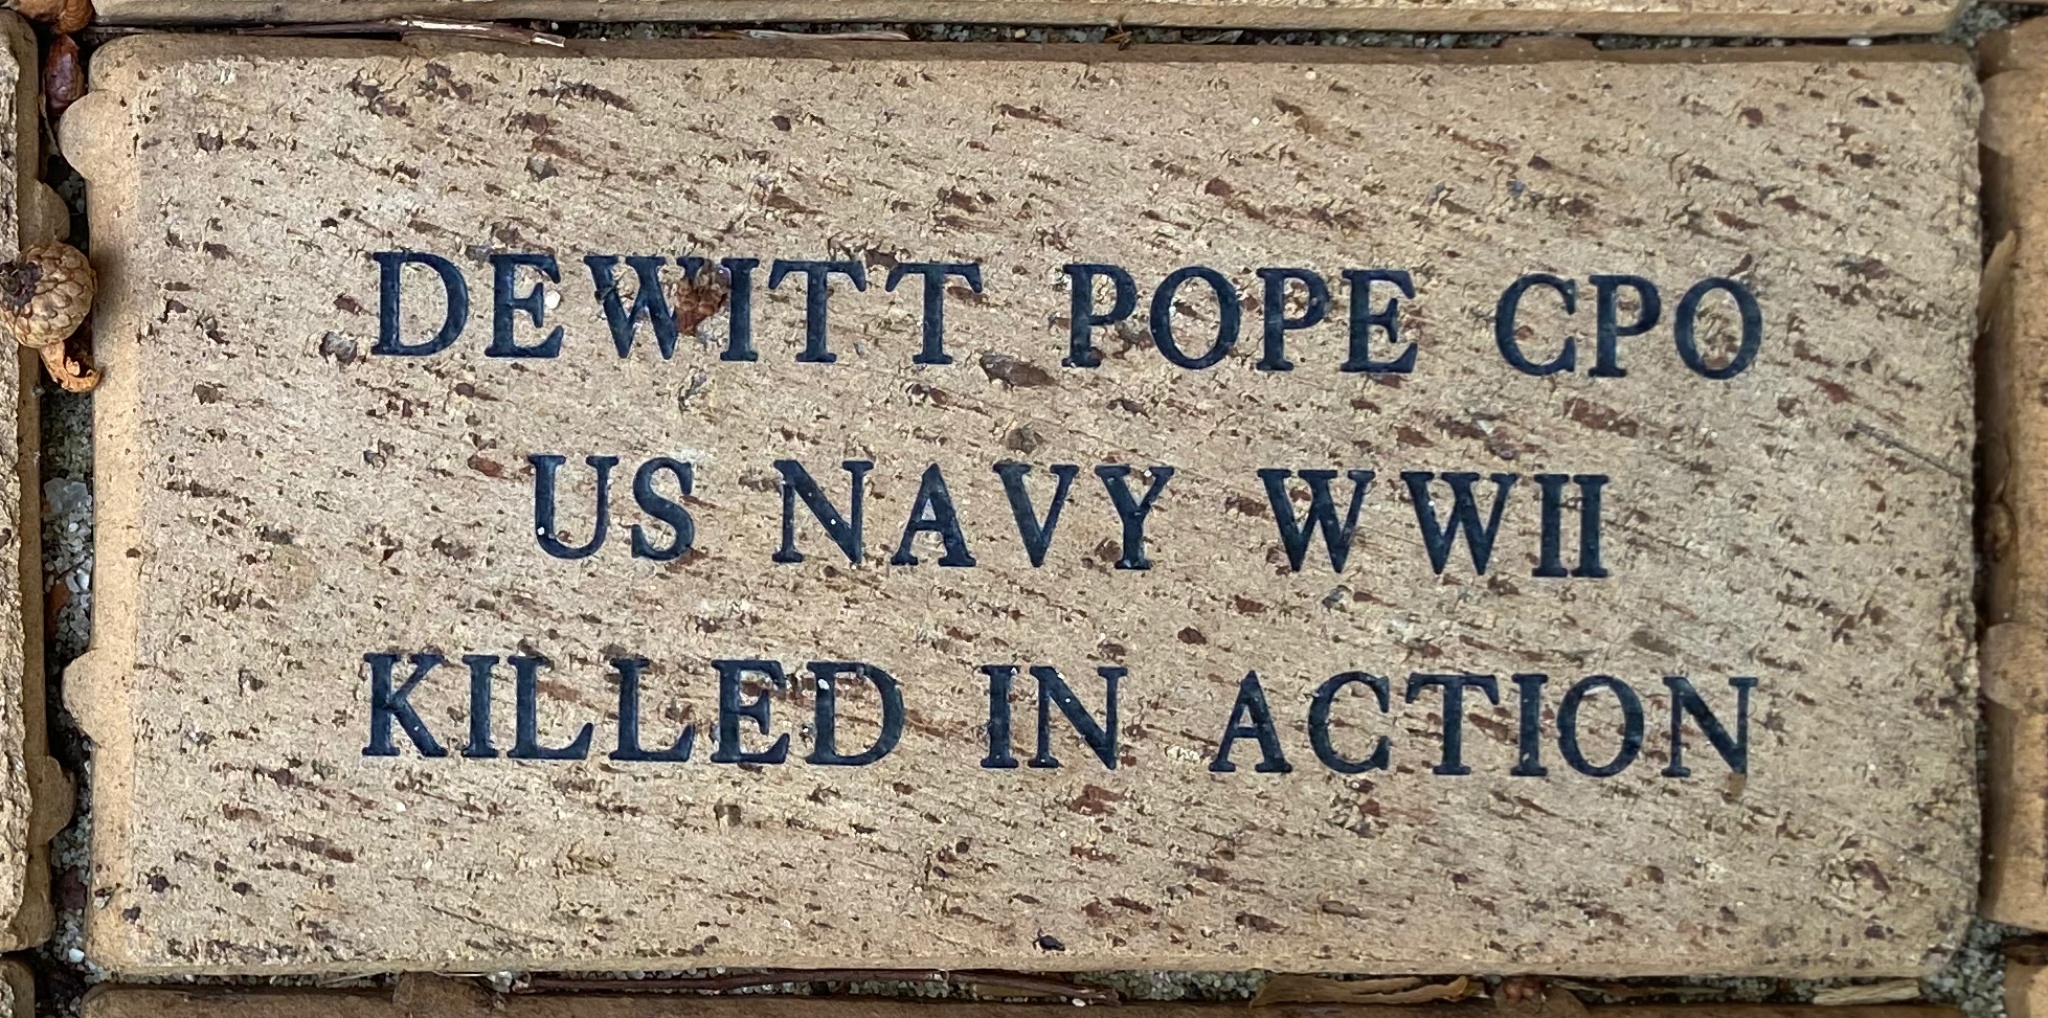 DEWITT POPE CPO US NAVY WWII KILLED IN ACTION